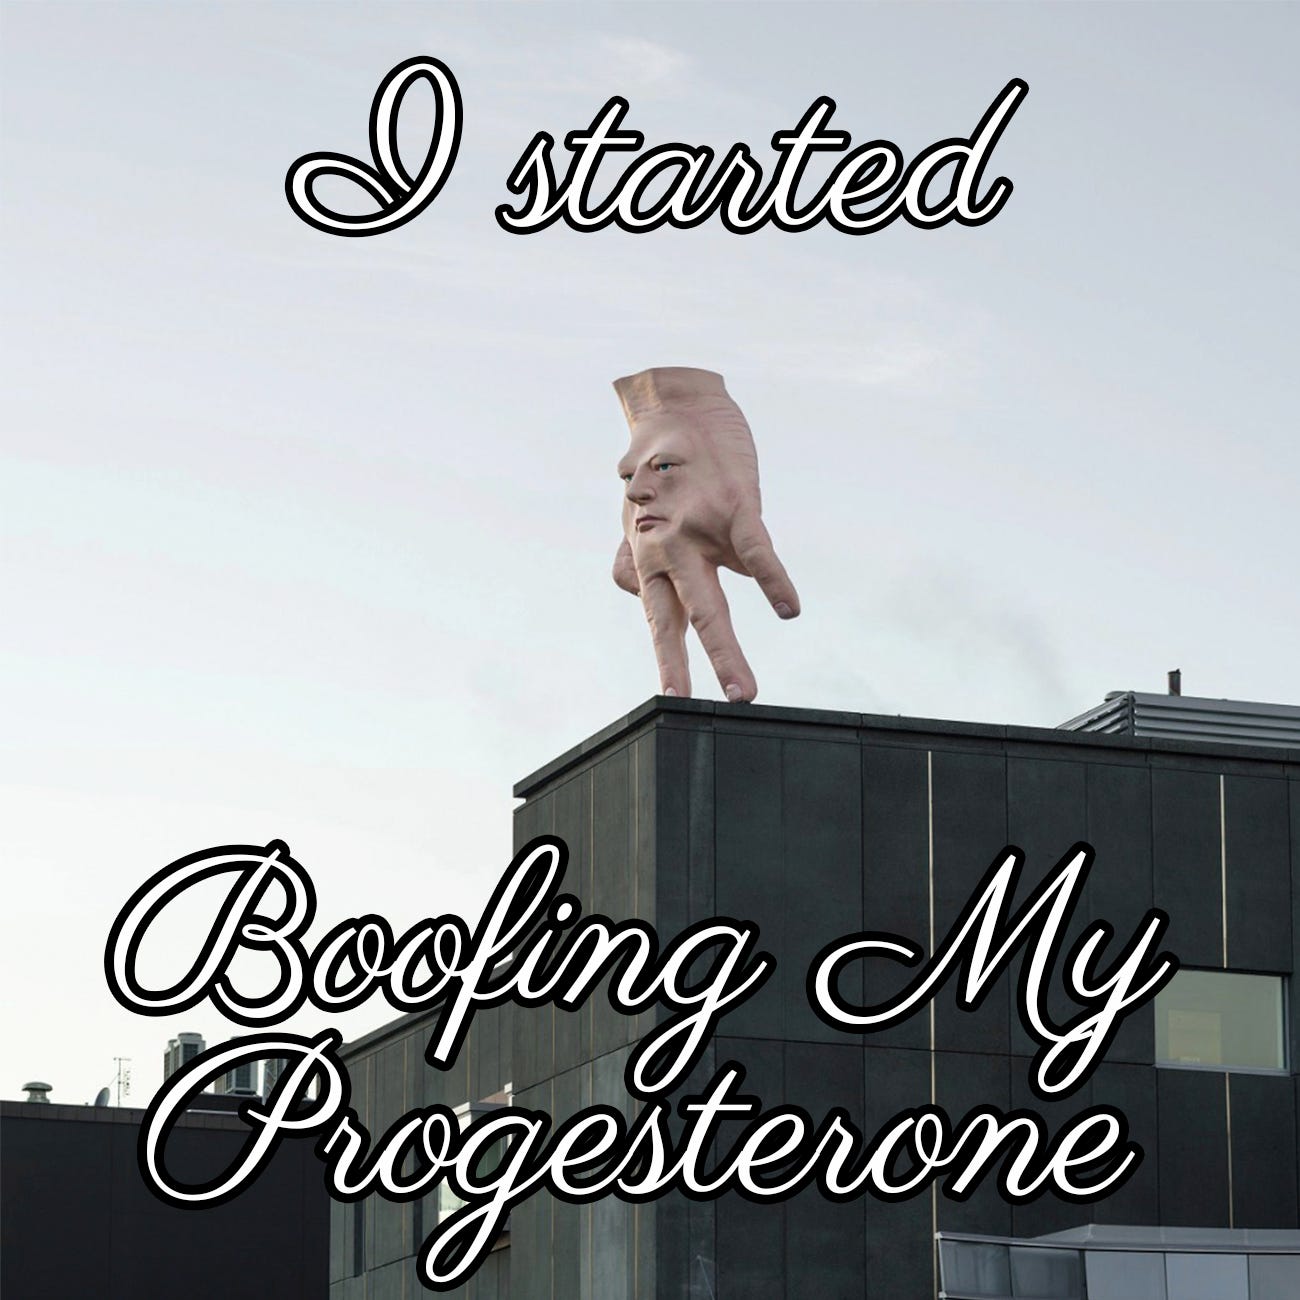 I started boofing my progesterone